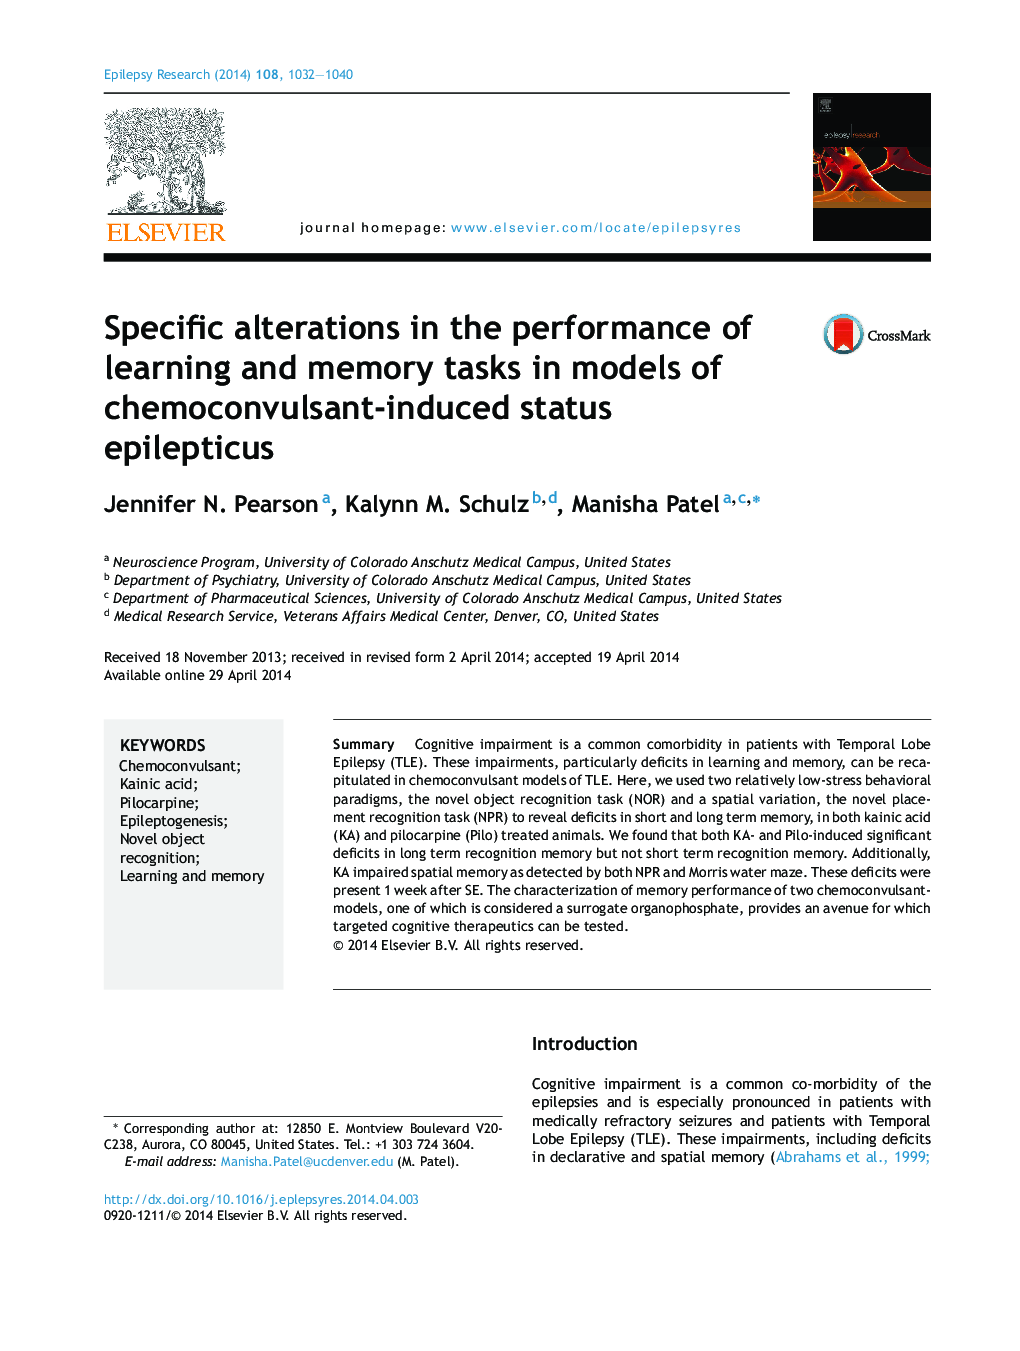 Specific alterations in the performance of learning and memory tasks in models of chemoconvulsant-induced status epilepticus